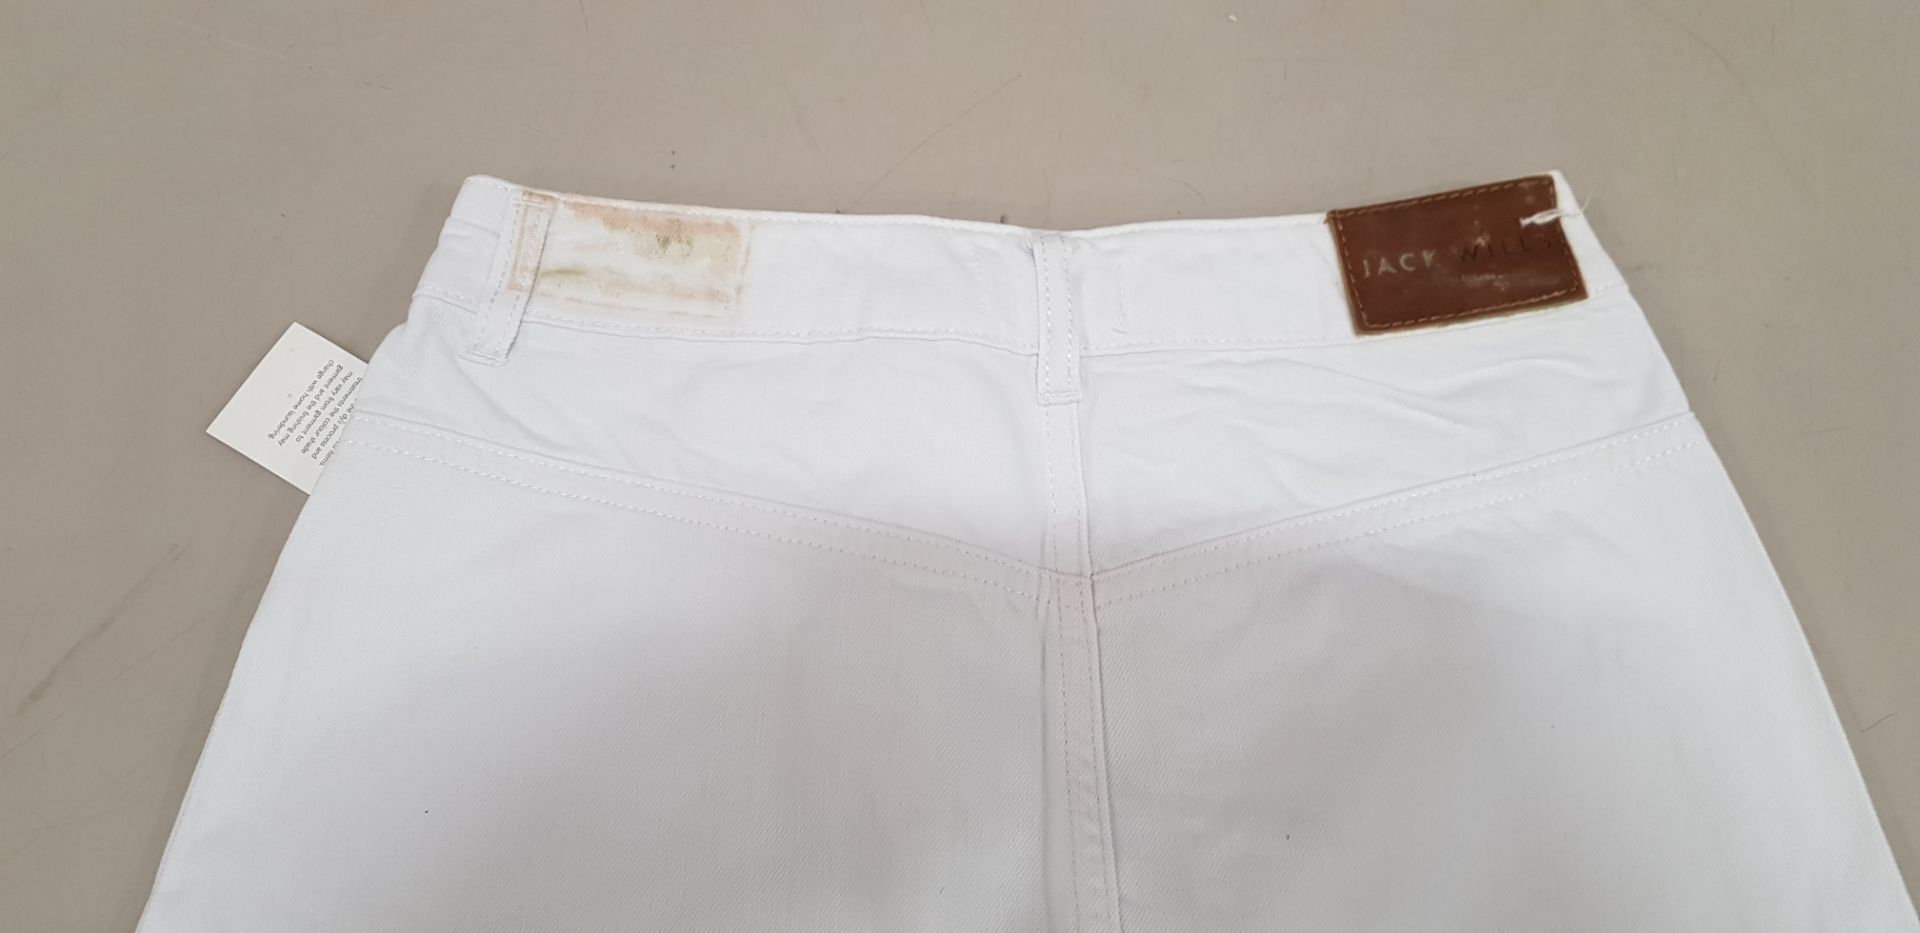 13 X BRAND NEW JACK WILLS CHARTHAM ZIP SKIRTS IN WHITE UK SIZE 6 (NOTE STAINING FROM LABEL ON BACK - - Image 2 of 2